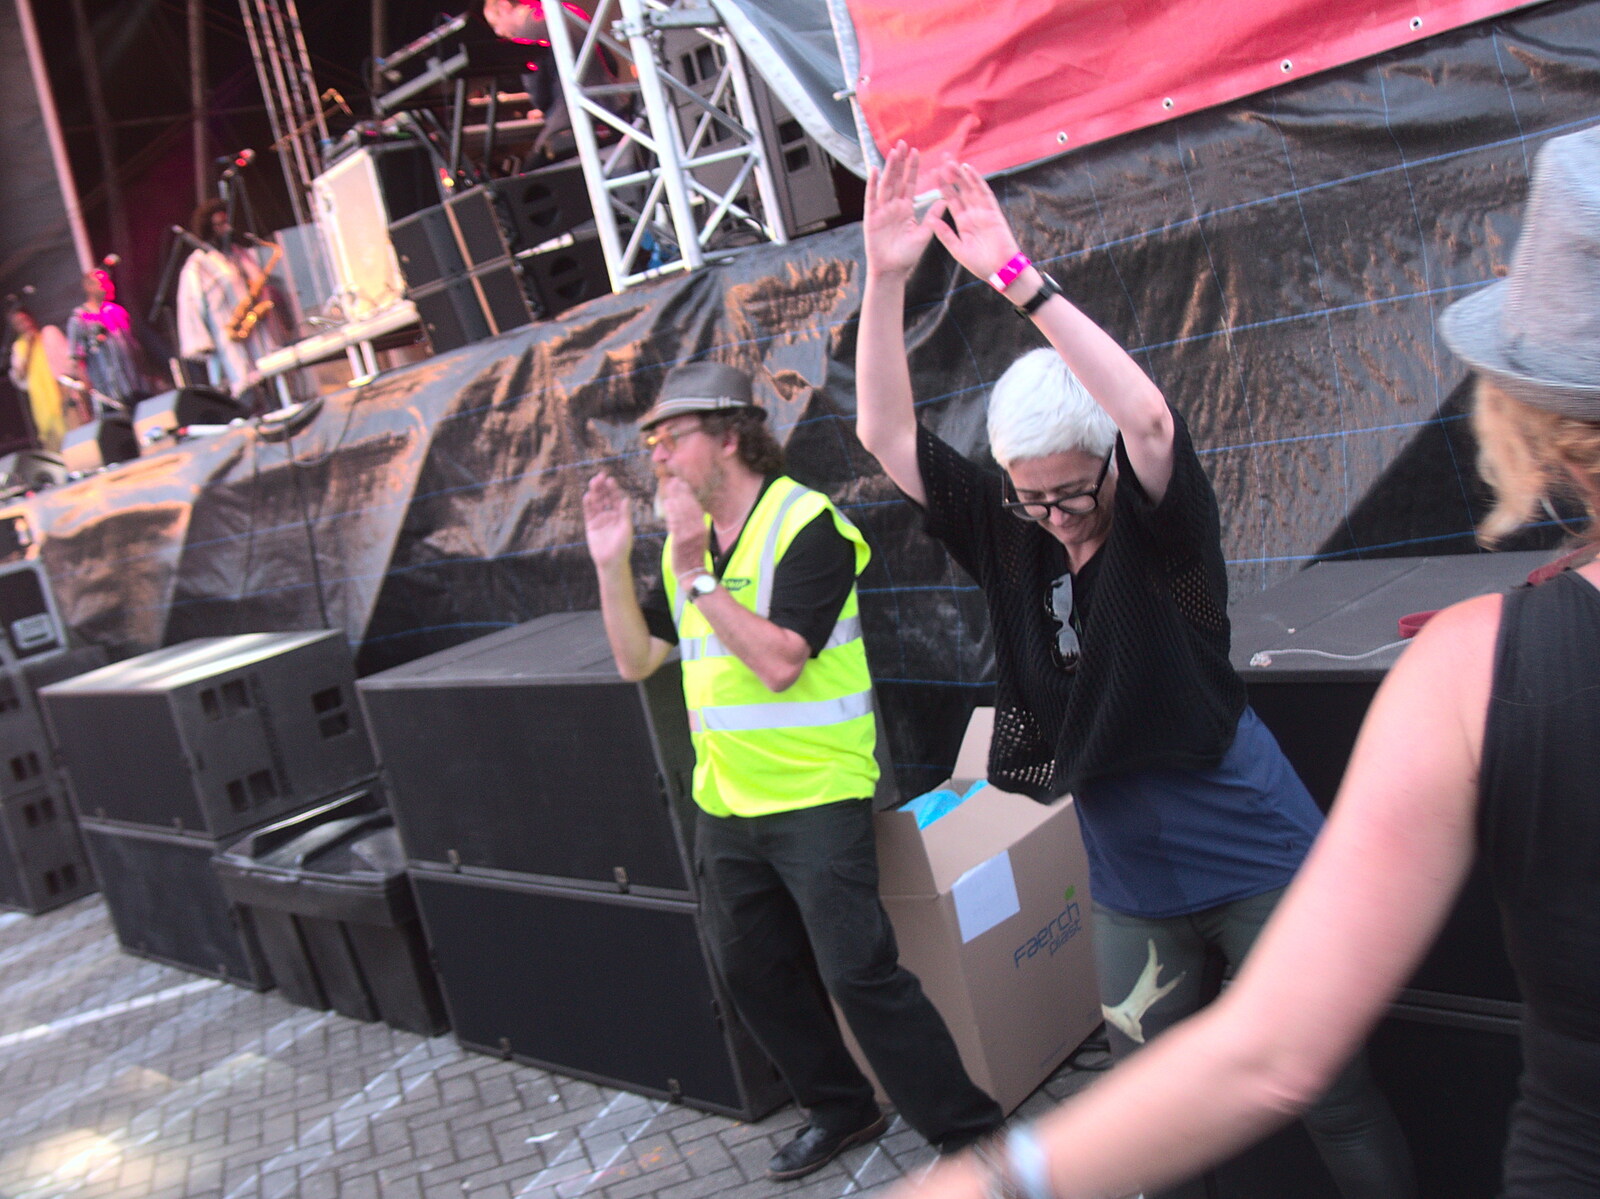 The stage crew get into the groove from Beatyard Festival, Dún Laoghaire, County Dublin, Ireland - 5th August 2018